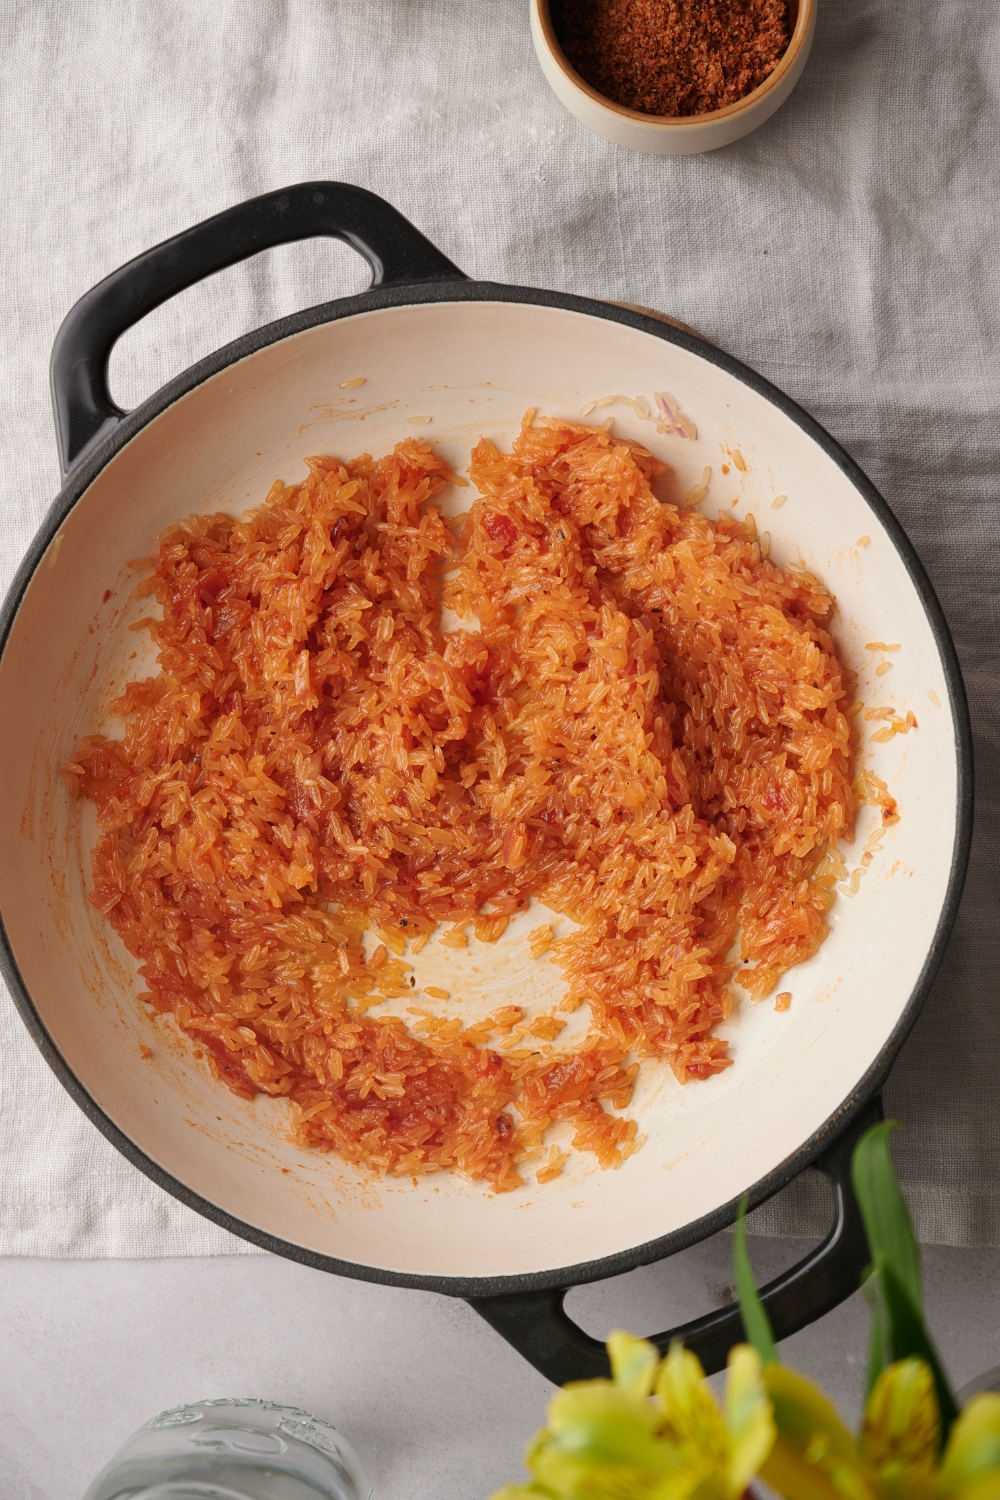 Tomato sauce and rice are combined with the cooked onion and garlic in a large white pot.